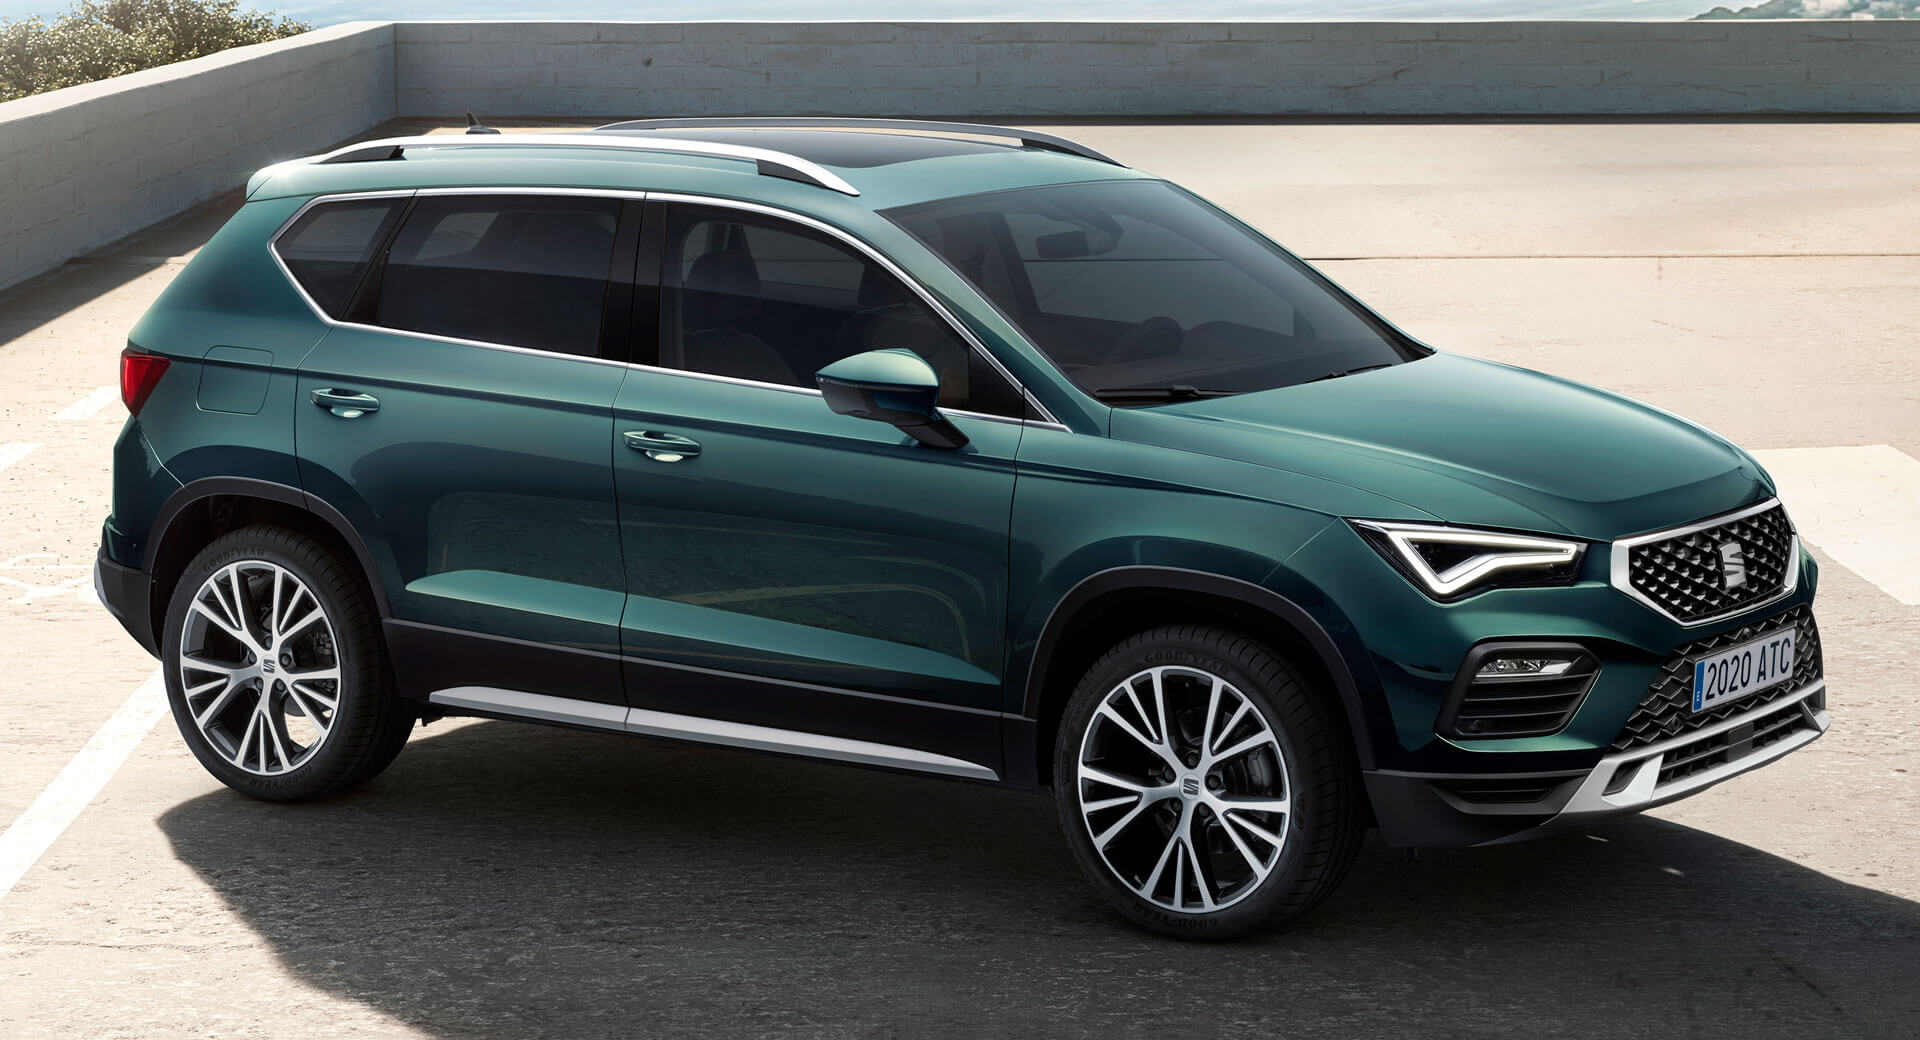 Facelifted 2021 Seat Ateca Launched In The UK From £23,670